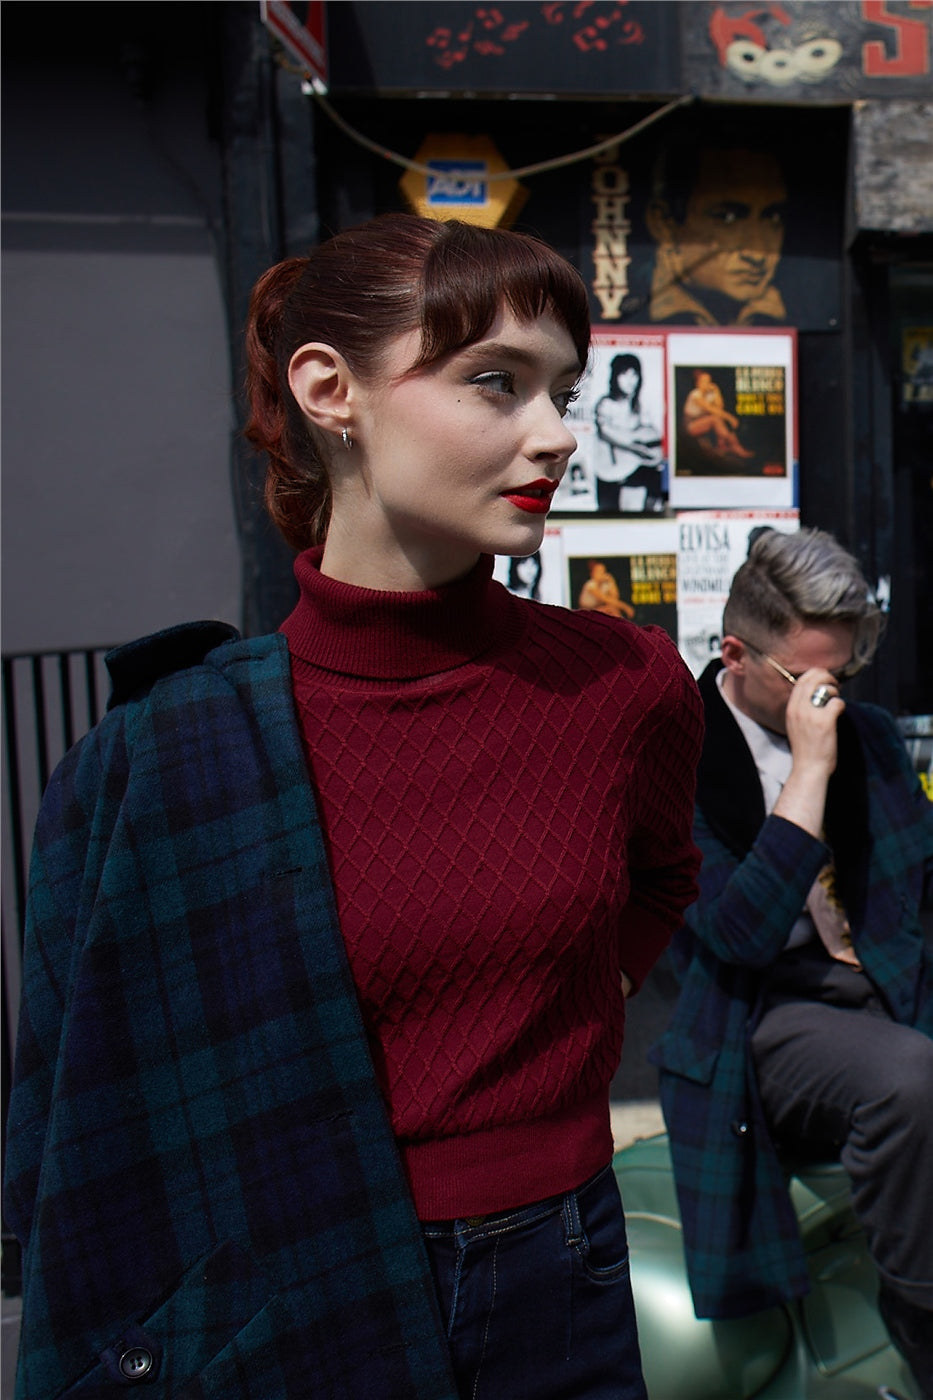 Brunette vintage styled model wearing a burgundy sweater, high waisted vintage jeans and a blue/green tartan coat around her shoulders standing outside a shop 